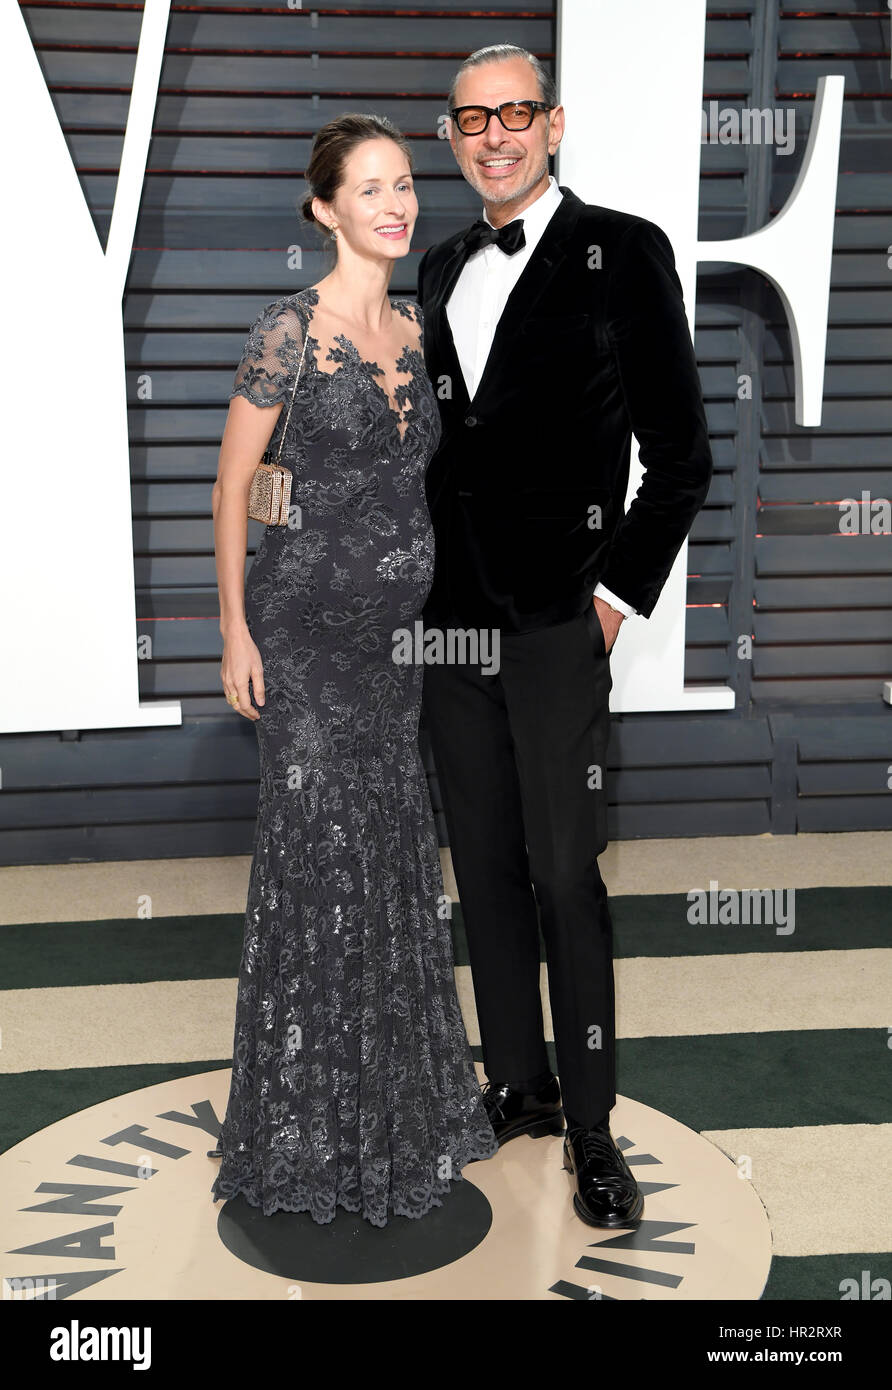 Jeff Goldblum and Emilie Livingston arriving at the Vanity Fair Oscar Party in Beverly Hills, Los Angeles, USA. Stock Photo